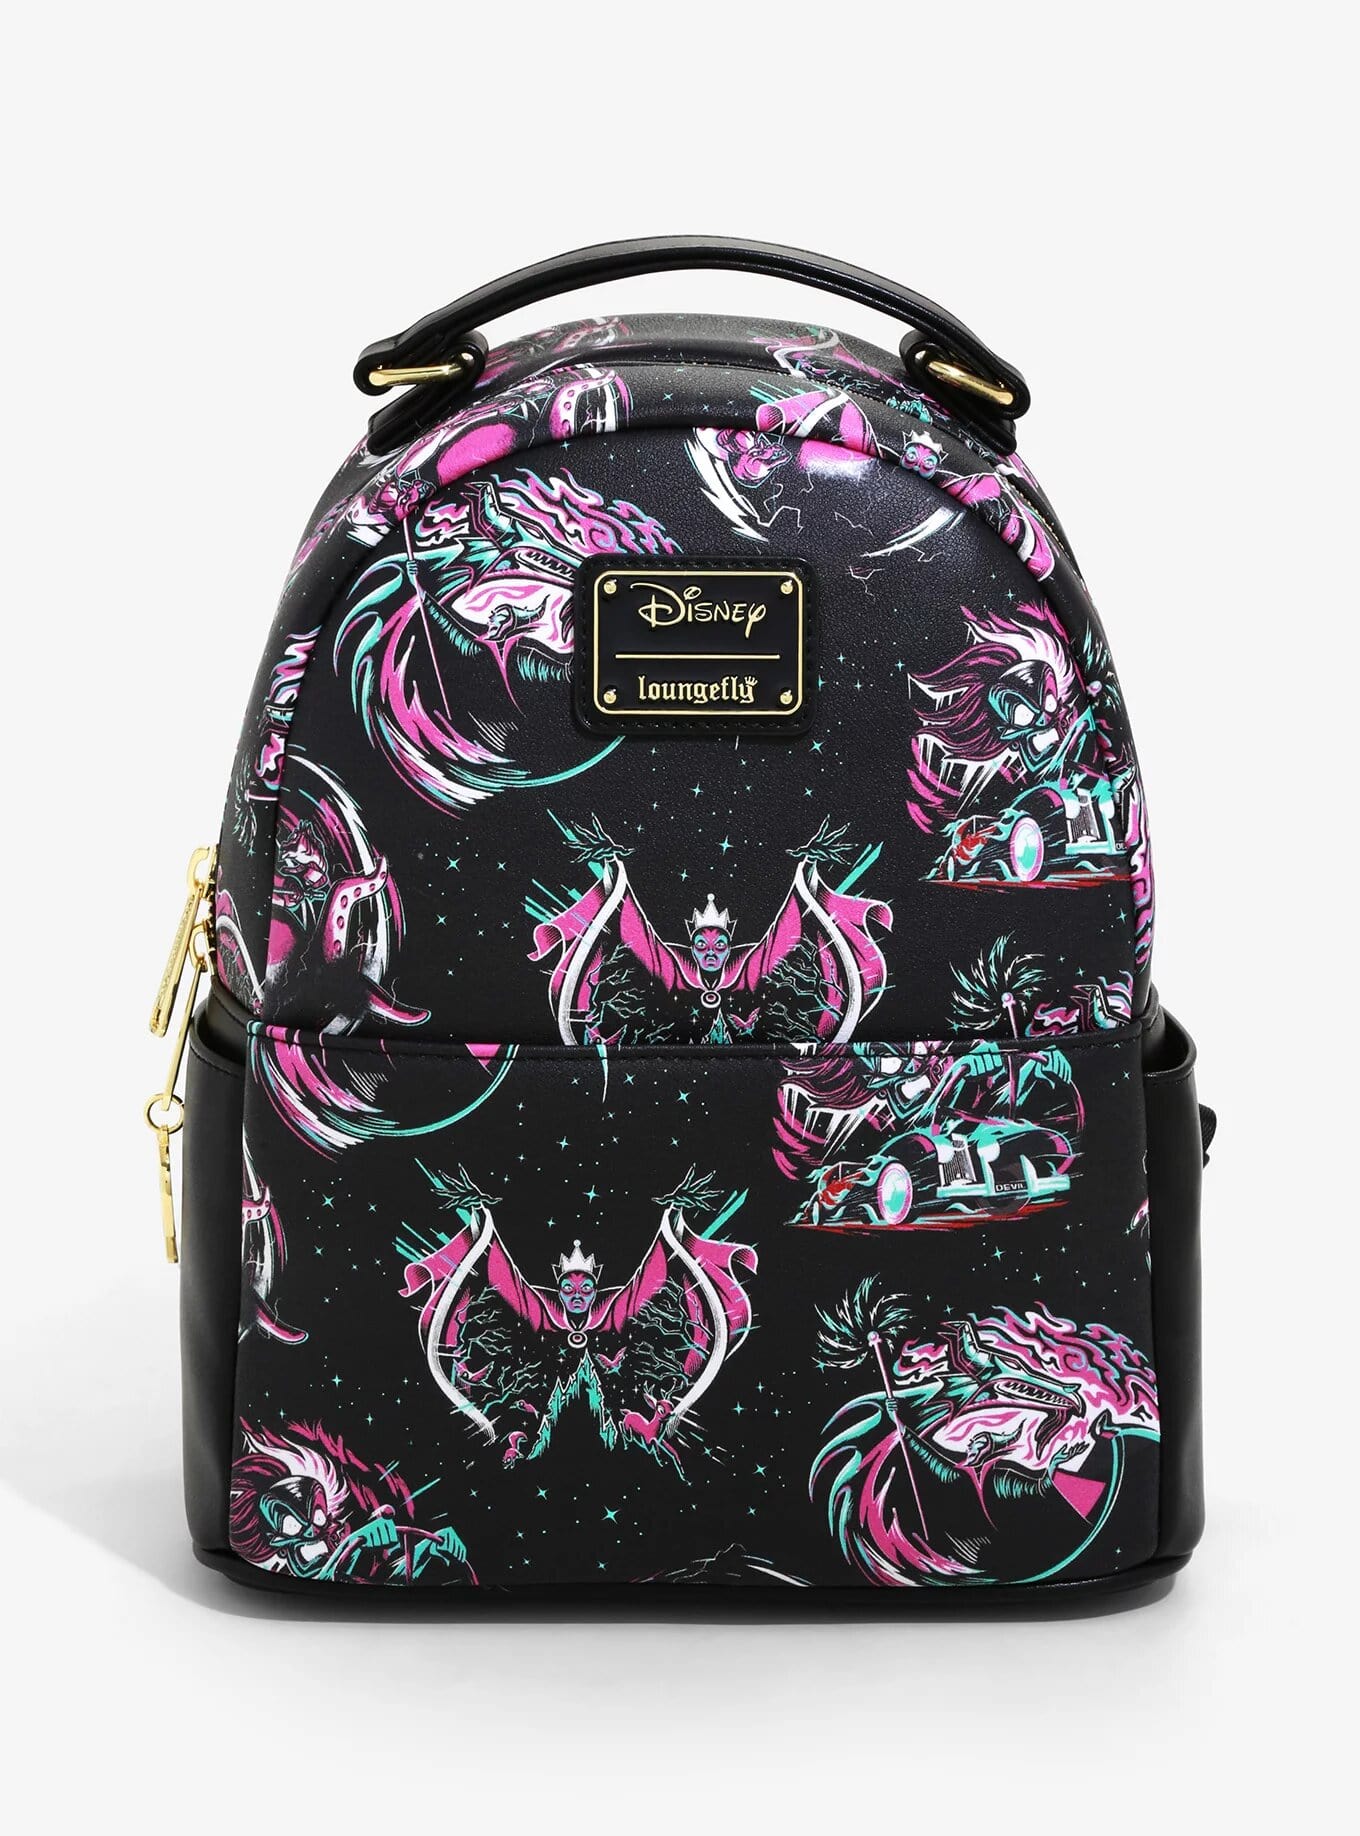 Get Grungy With This New Disney Villains Loungefly Backpack! Disney